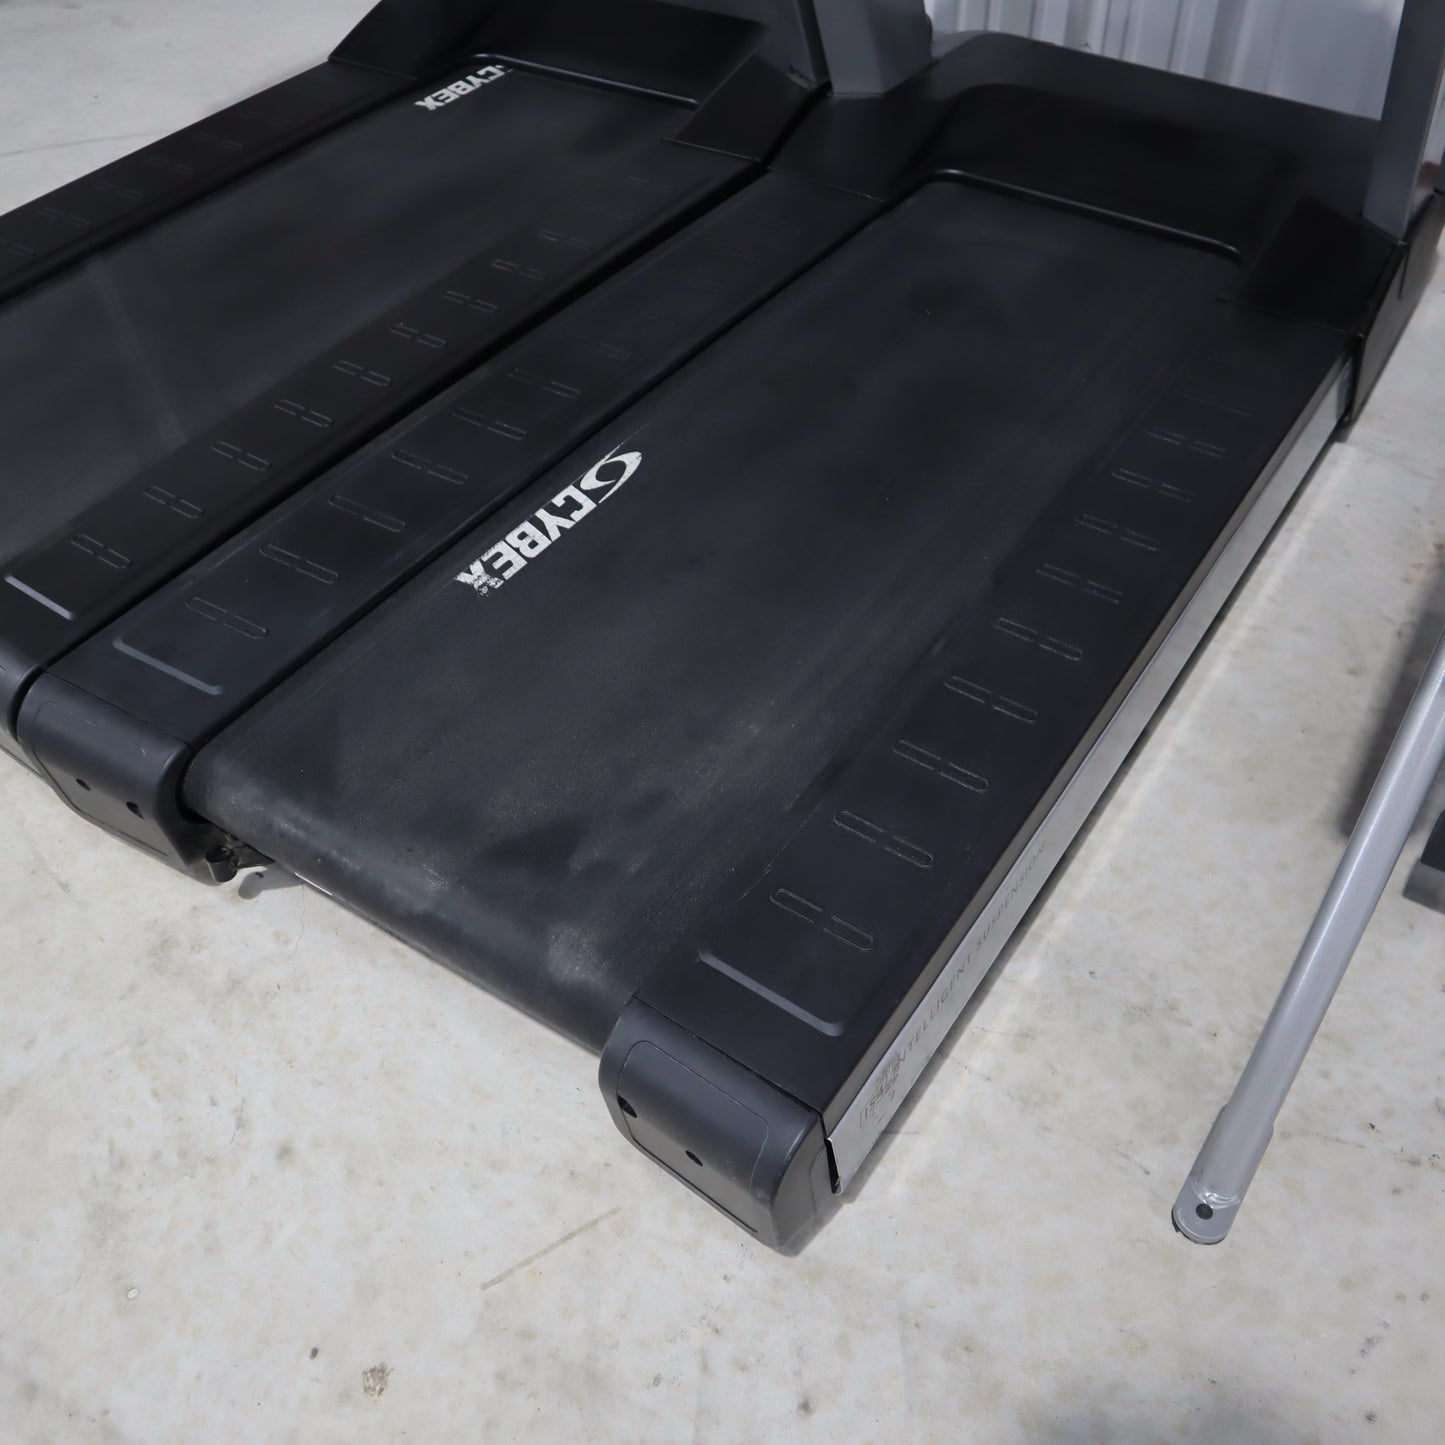 Cybex Treadmill & Arc Trainer Package *Two R Series Treads, Two 626AT Arc Trainer* (Used)